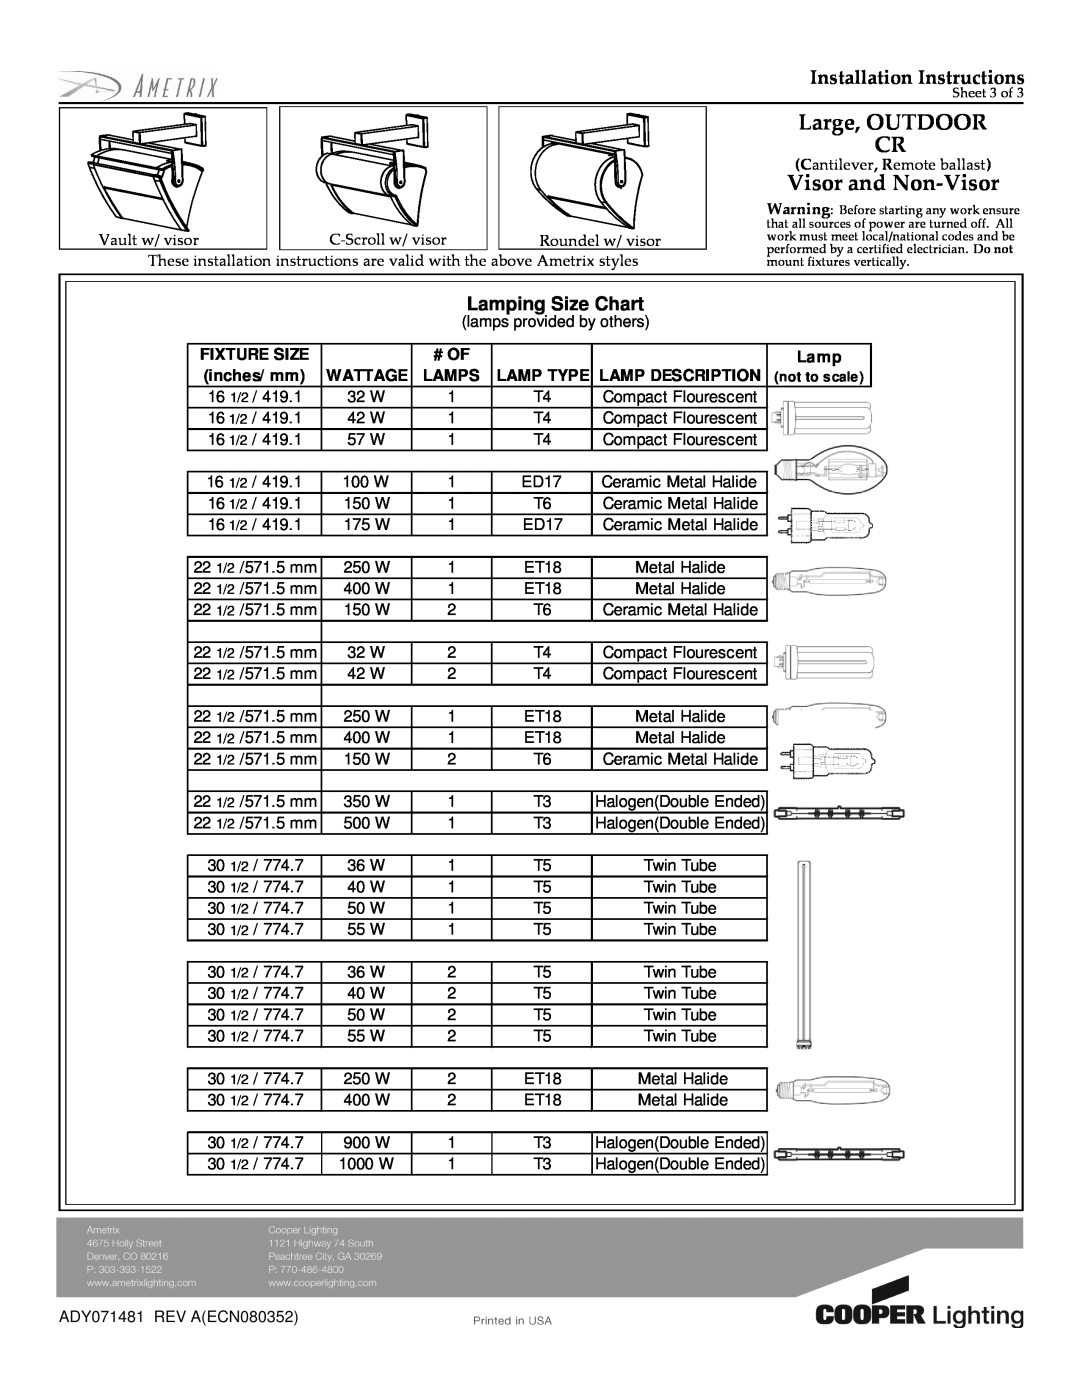 Cooper Lighting ADY071481 Large, OUTDOOR CR, Visor and Non-Visor, Installation Instructions, Fixture Size, # Of, Lamp 